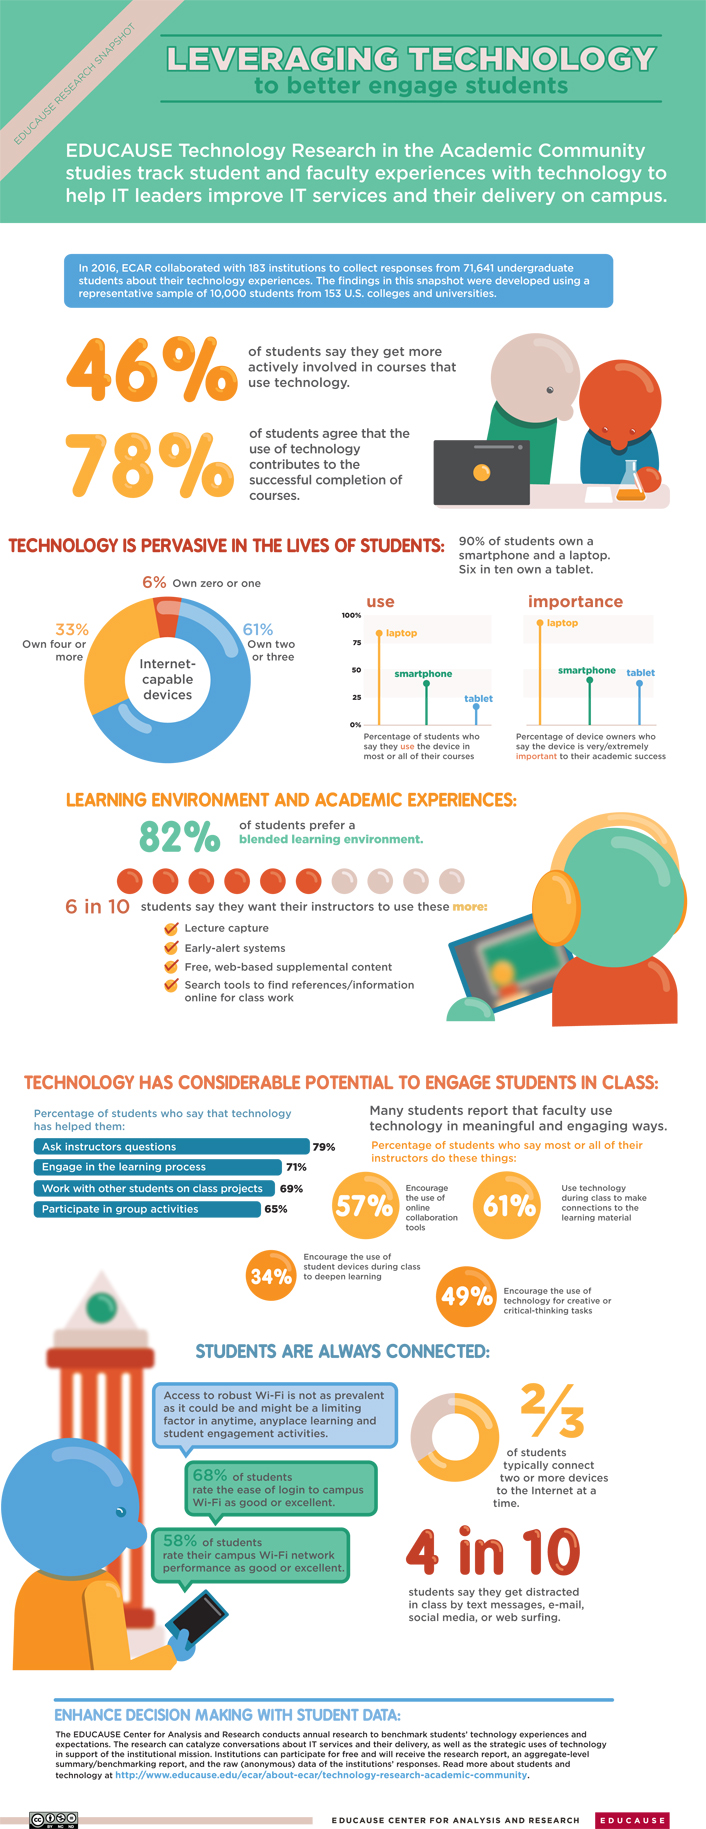 EDUCAUSE Research Snapshot: Leveraging Technology to Better Engage Students